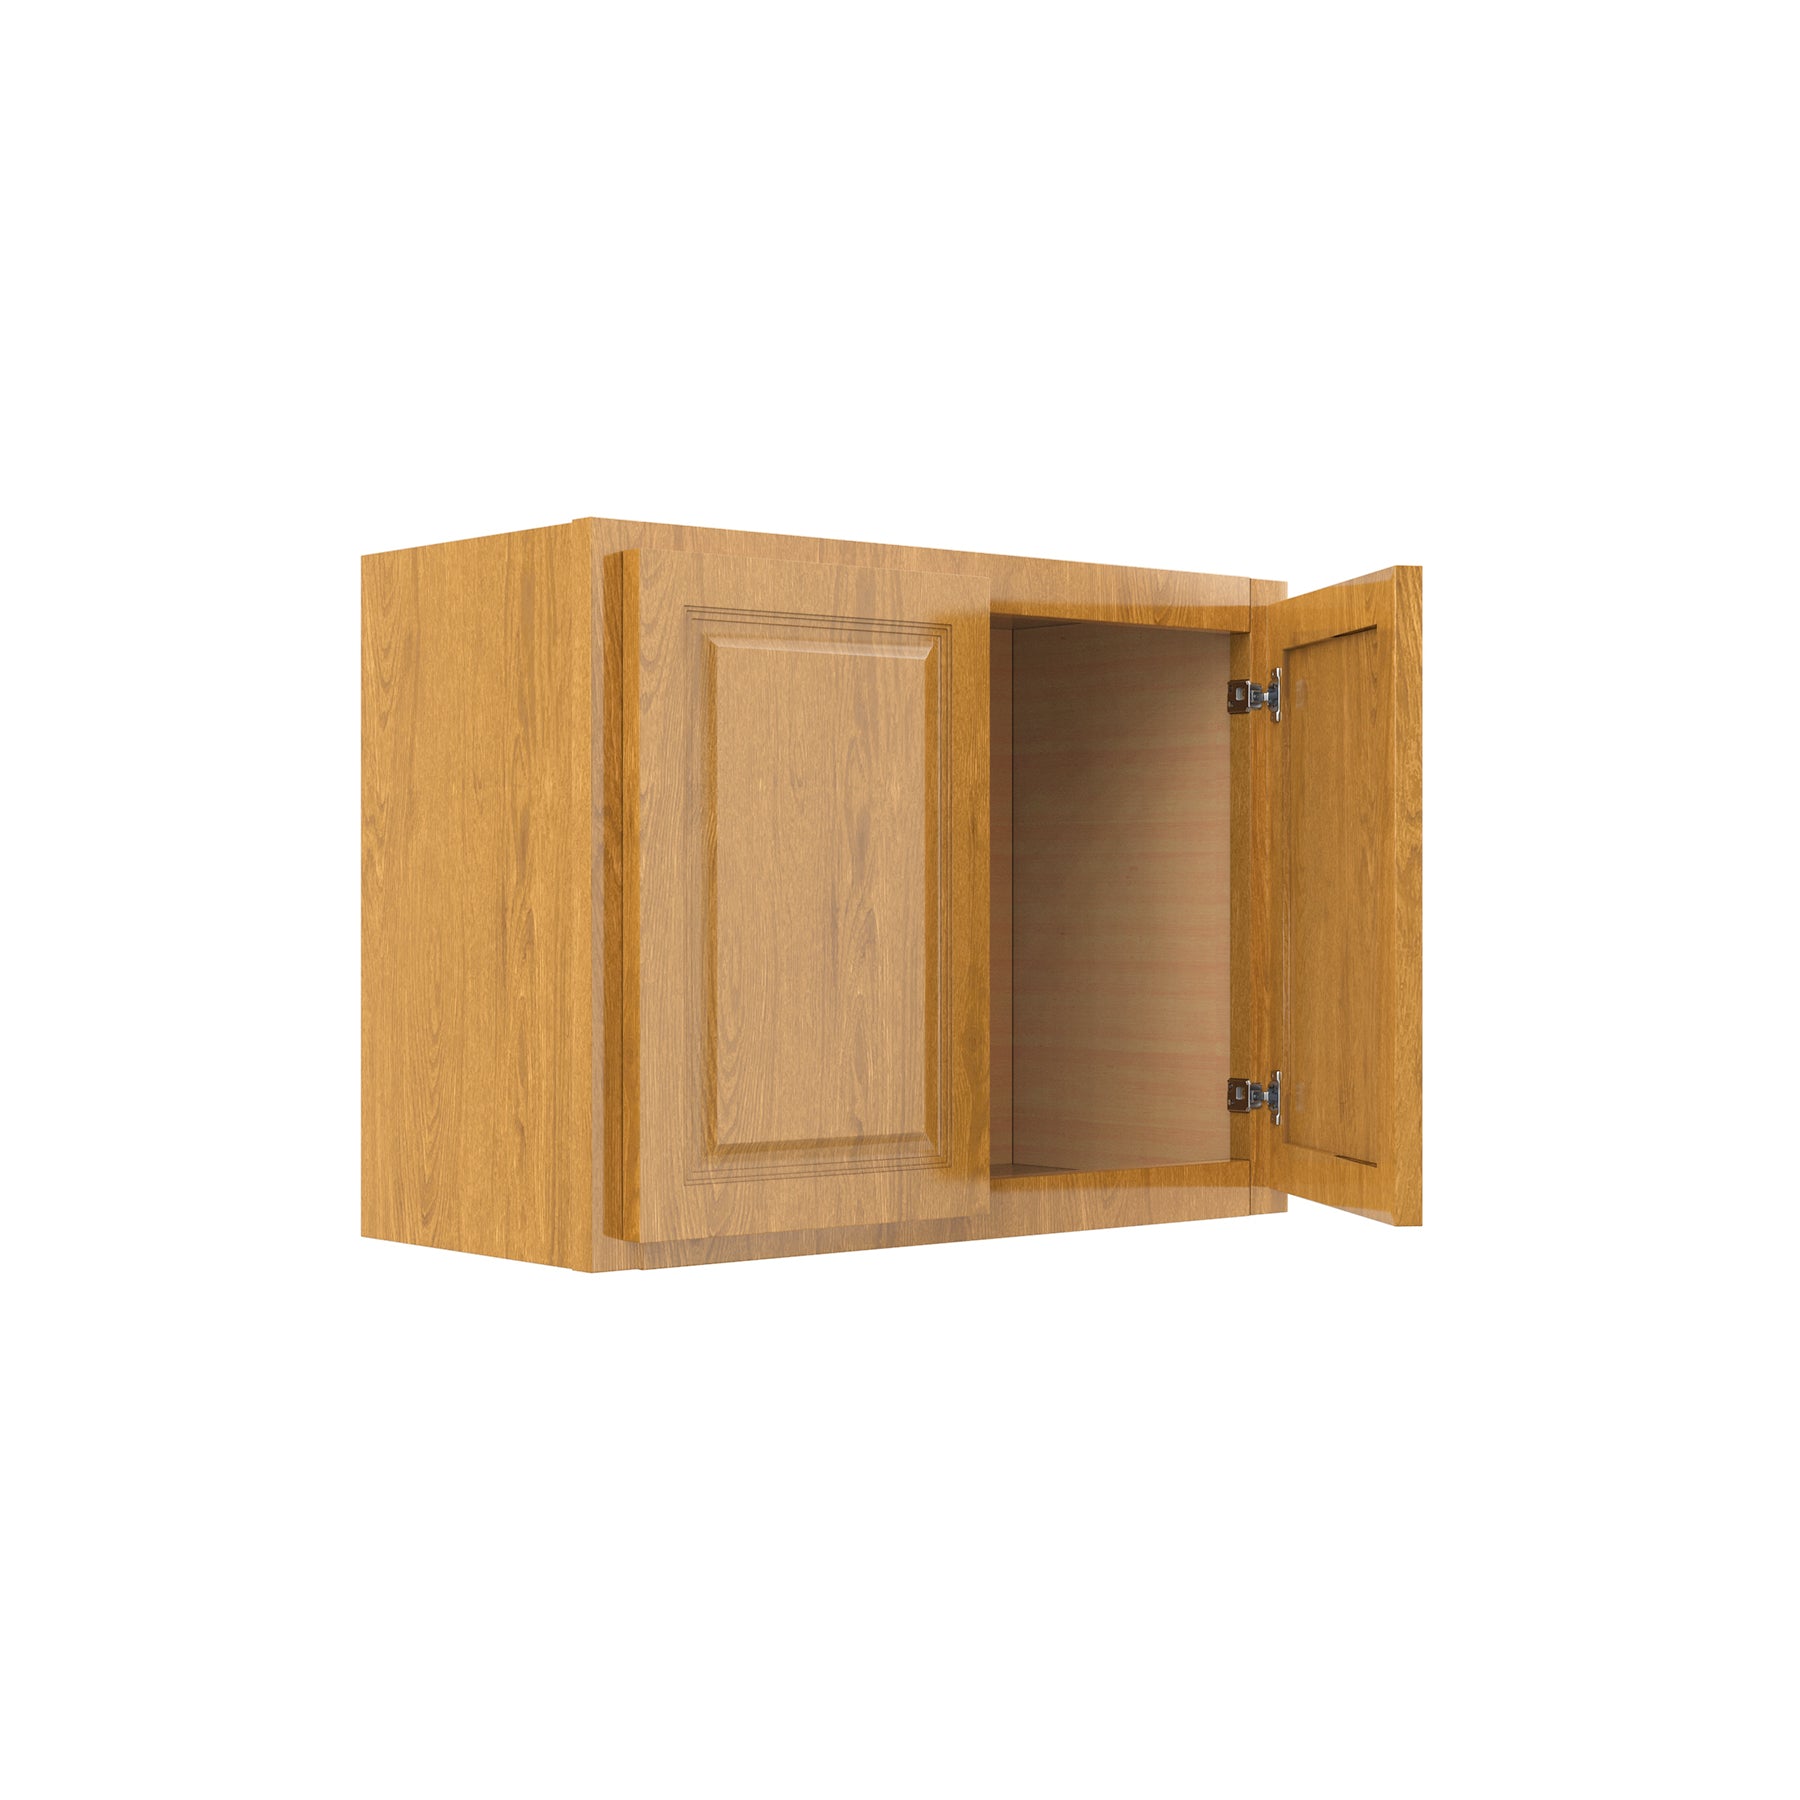 Country Oak 24"W x 18"H Wall Cabinet